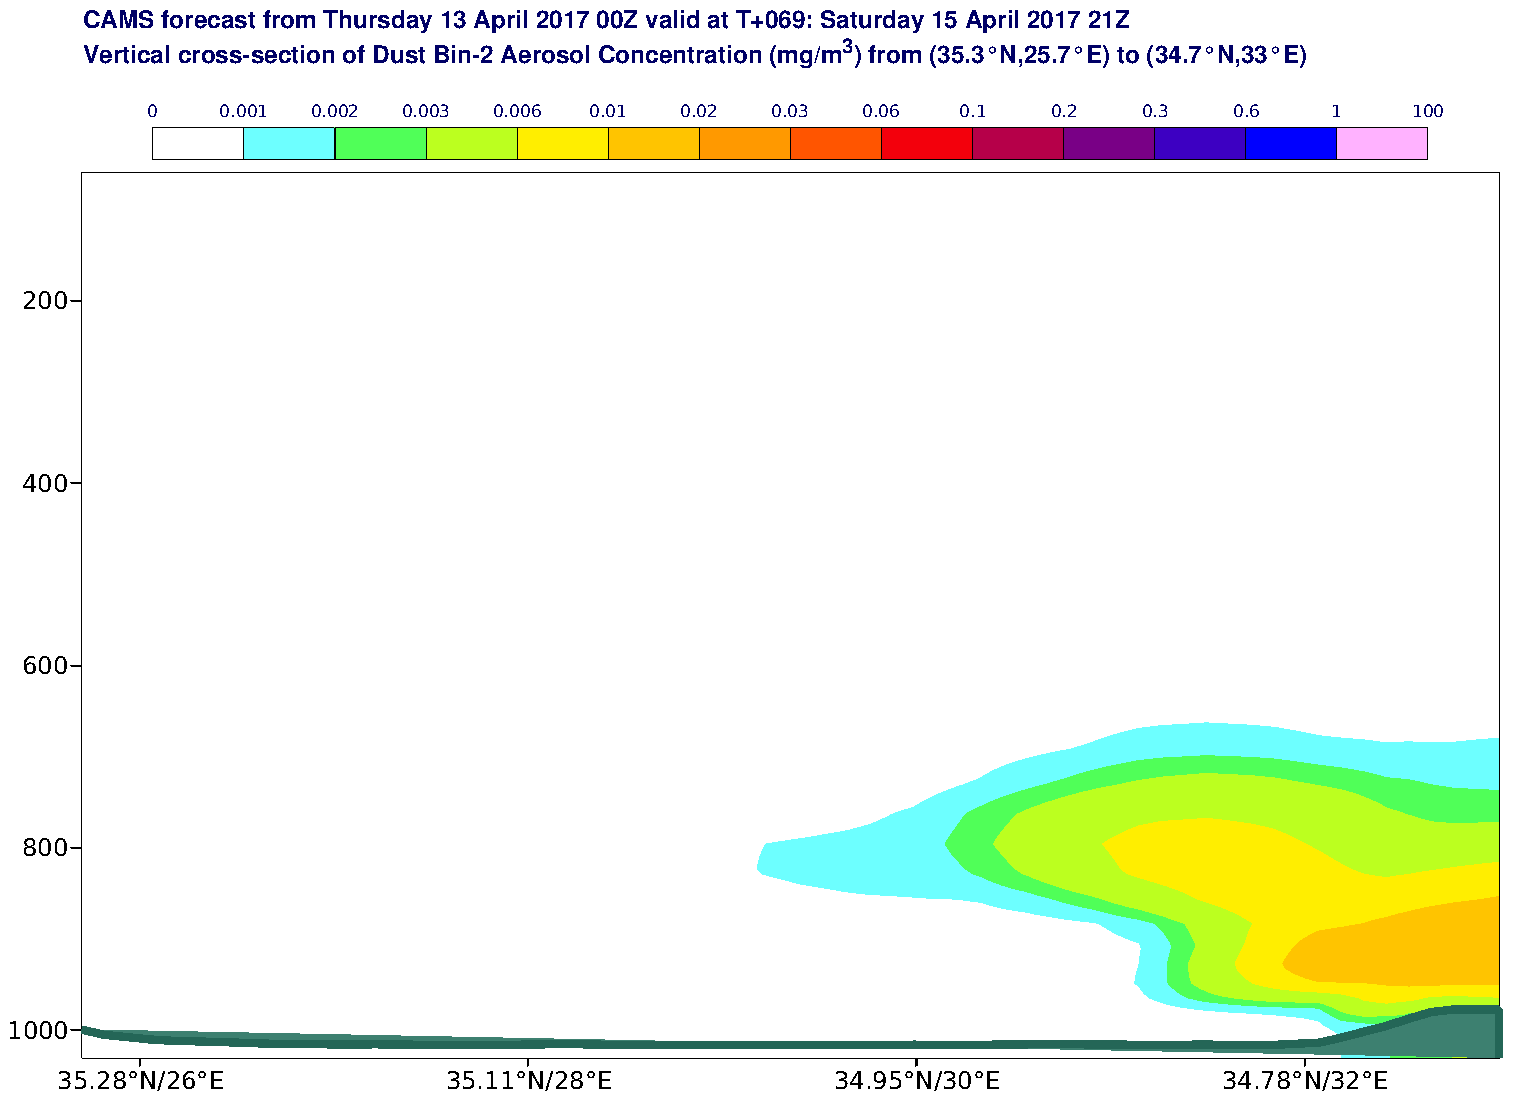 Vertical cross-section of Dust Bin-2 Aerosol Concentration (mg/m3) valid at T69 - 2017-04-15 21:00